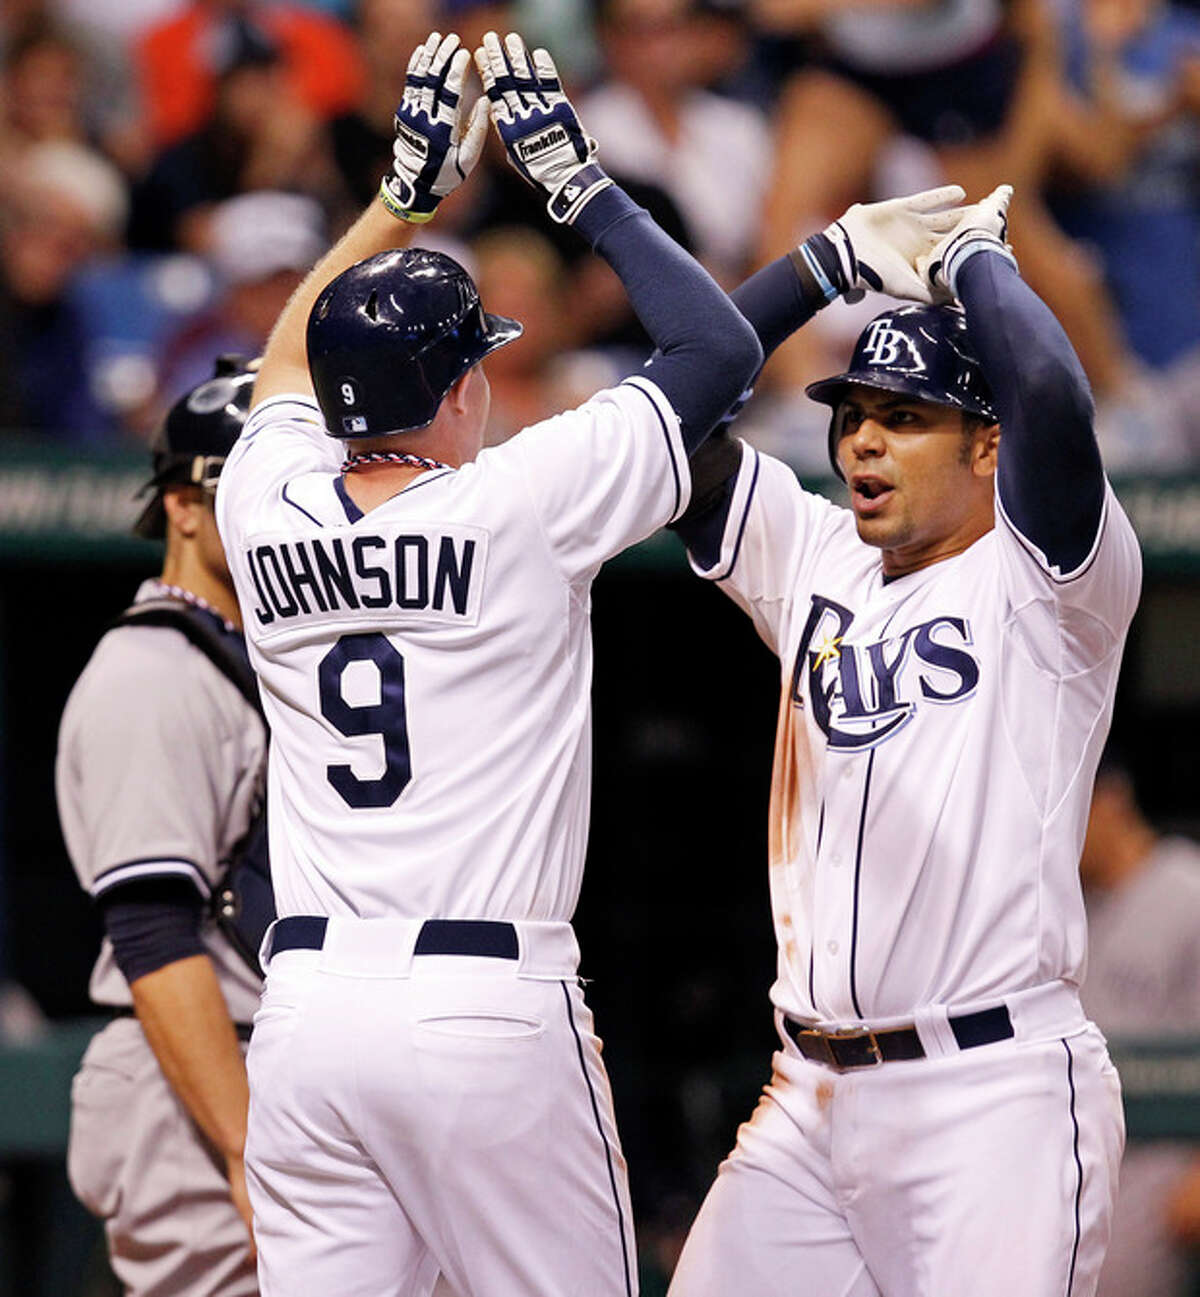 Tampa Bay Rays' Carlos Pena, right, is congratulated by Elliot Johnson after his two-run home run scored both during the seventh inning of a baseball game against the New York Yankees, Wednesday, July 4, 2012, in St. Petersburg, Fla. (AP Photo/Mike Carlson)